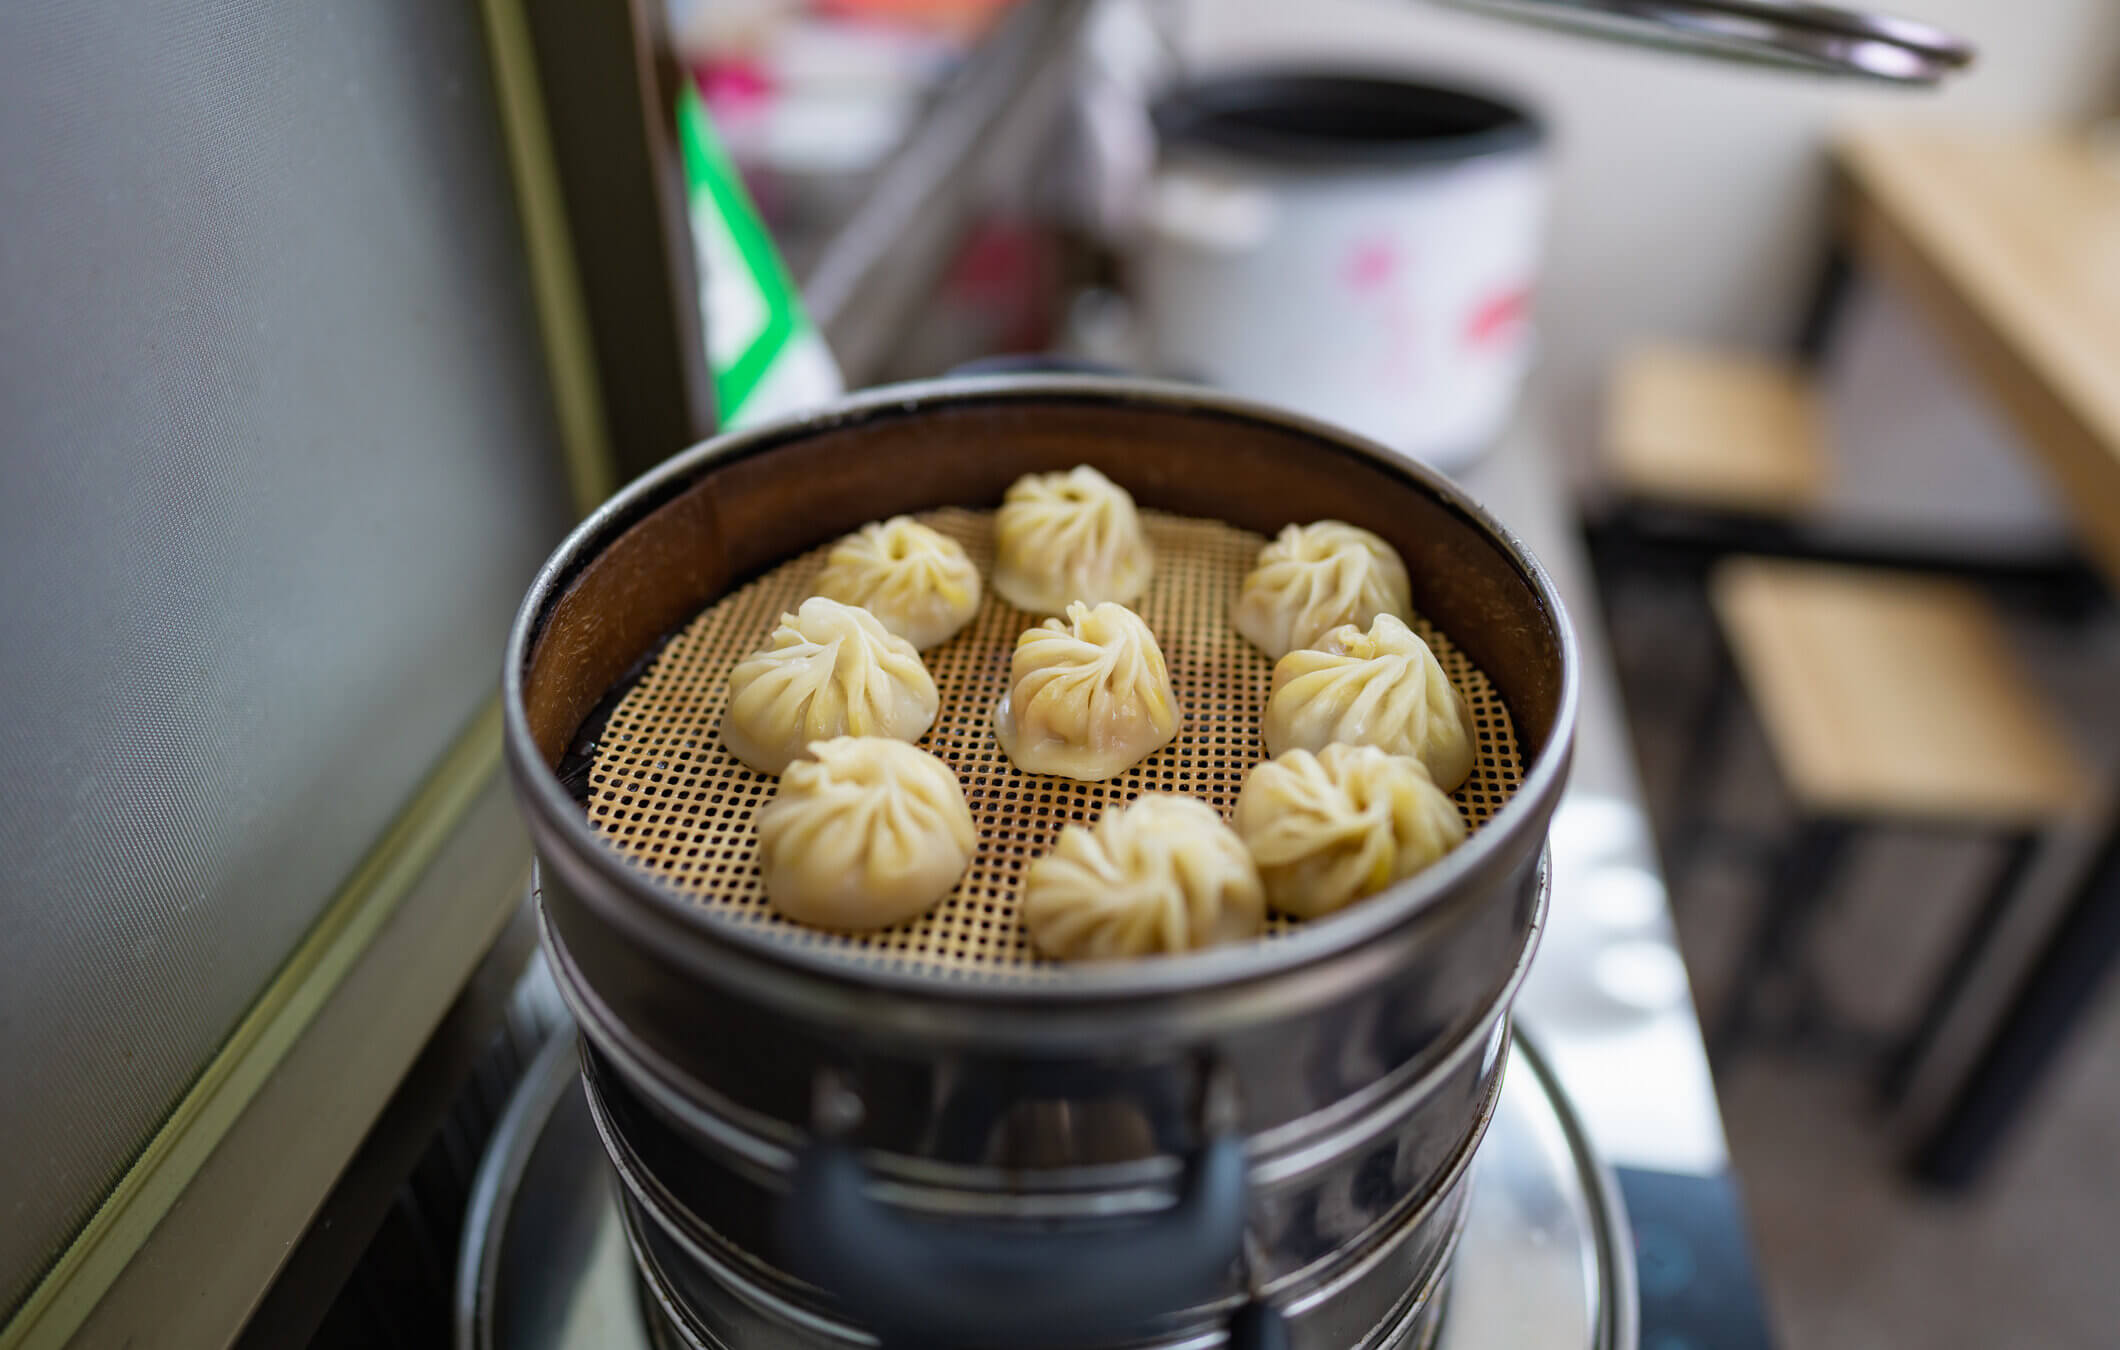 Cooked xiaolongbao. None of the dumplings pictured above were harmed (or pilfered) in the creation of this essay.